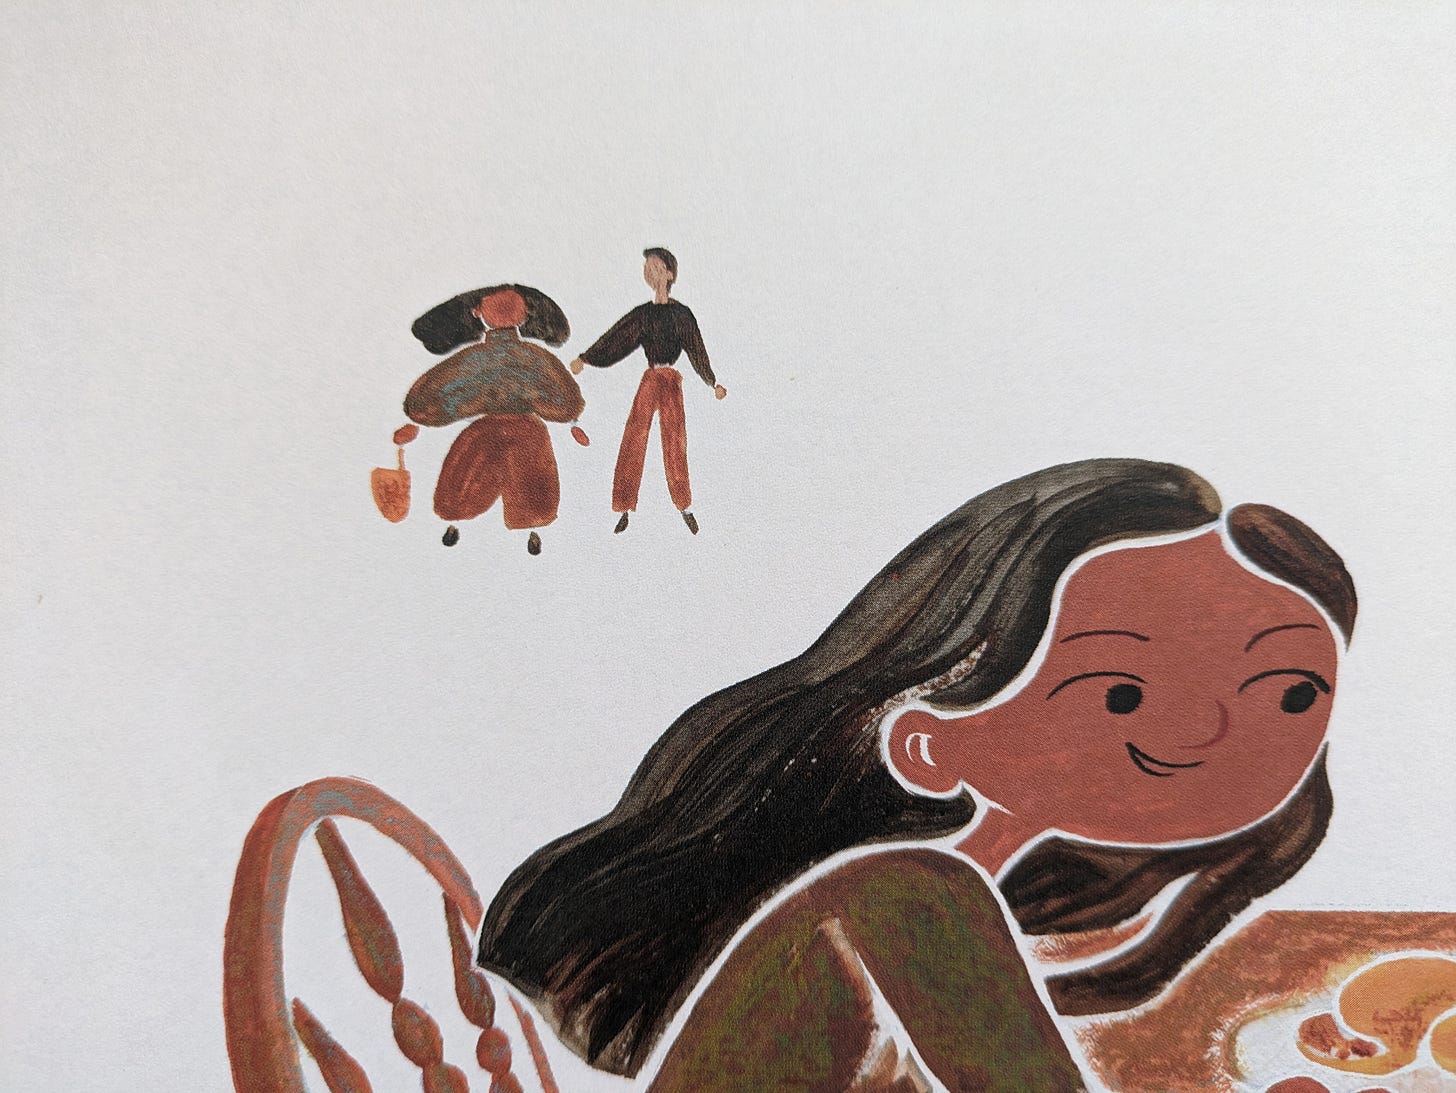 a close-up of an illustration in A RAINBOW IN BROWN showing two figures holding hands